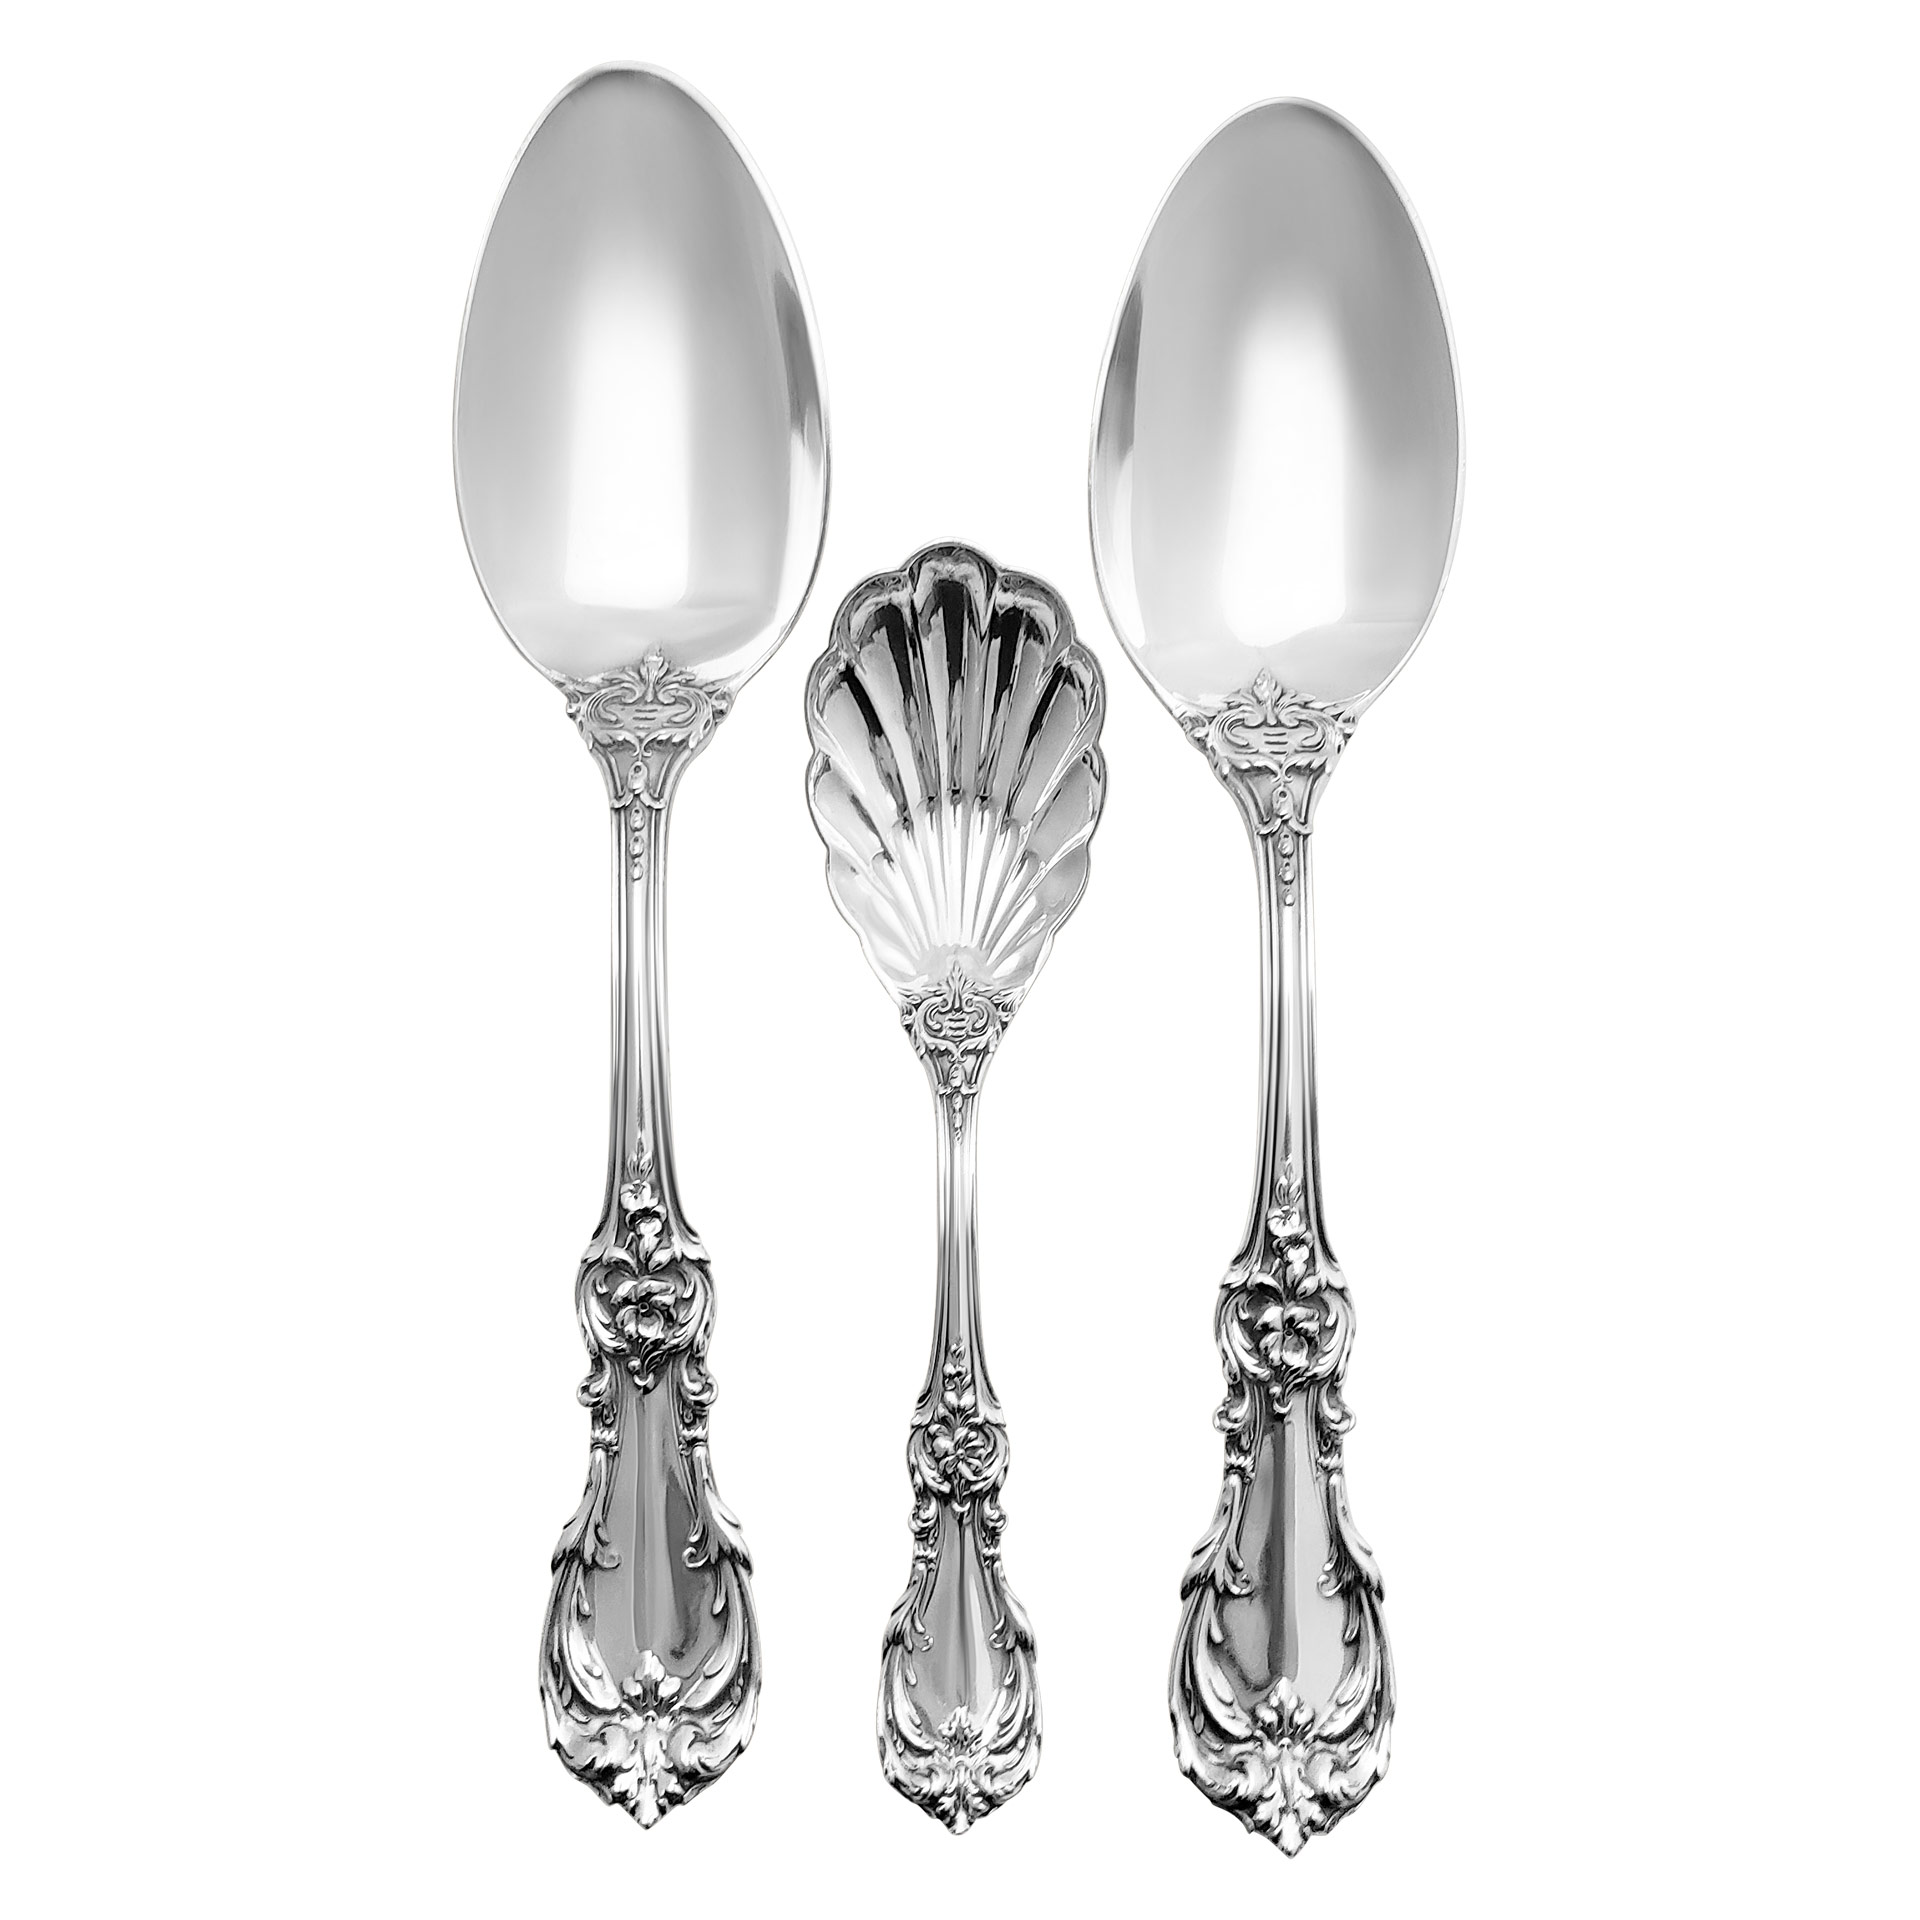 "BURGUNDY" sterling silver flatware set, ptd in 1949 by Reed & Barton- 95 pieces total- image 3